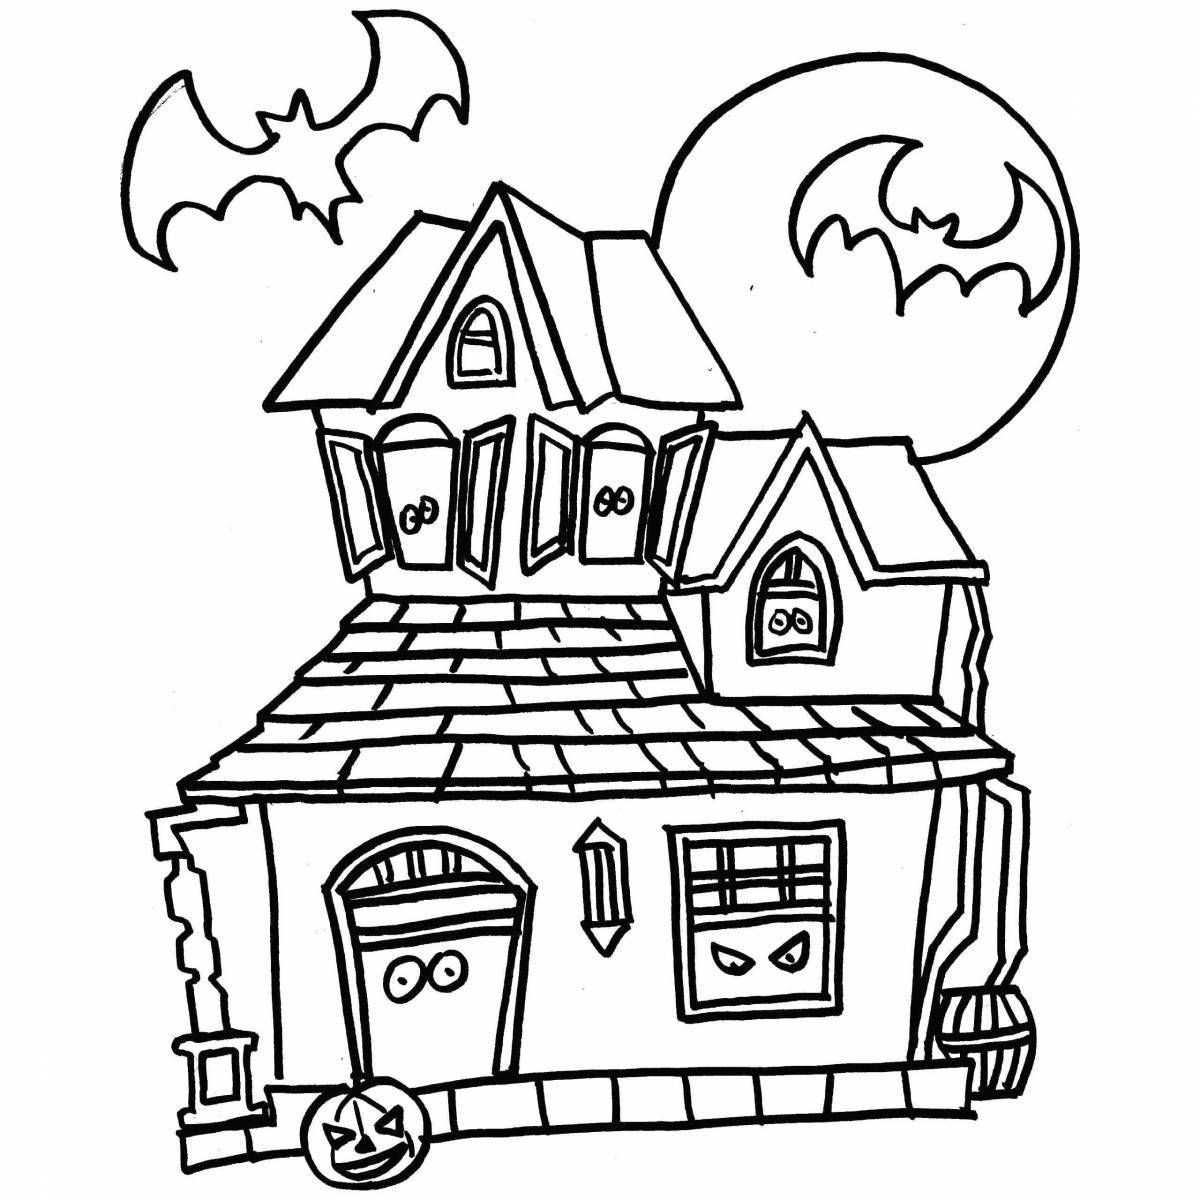 Fabulous house coloring pages for 5-6 year olds